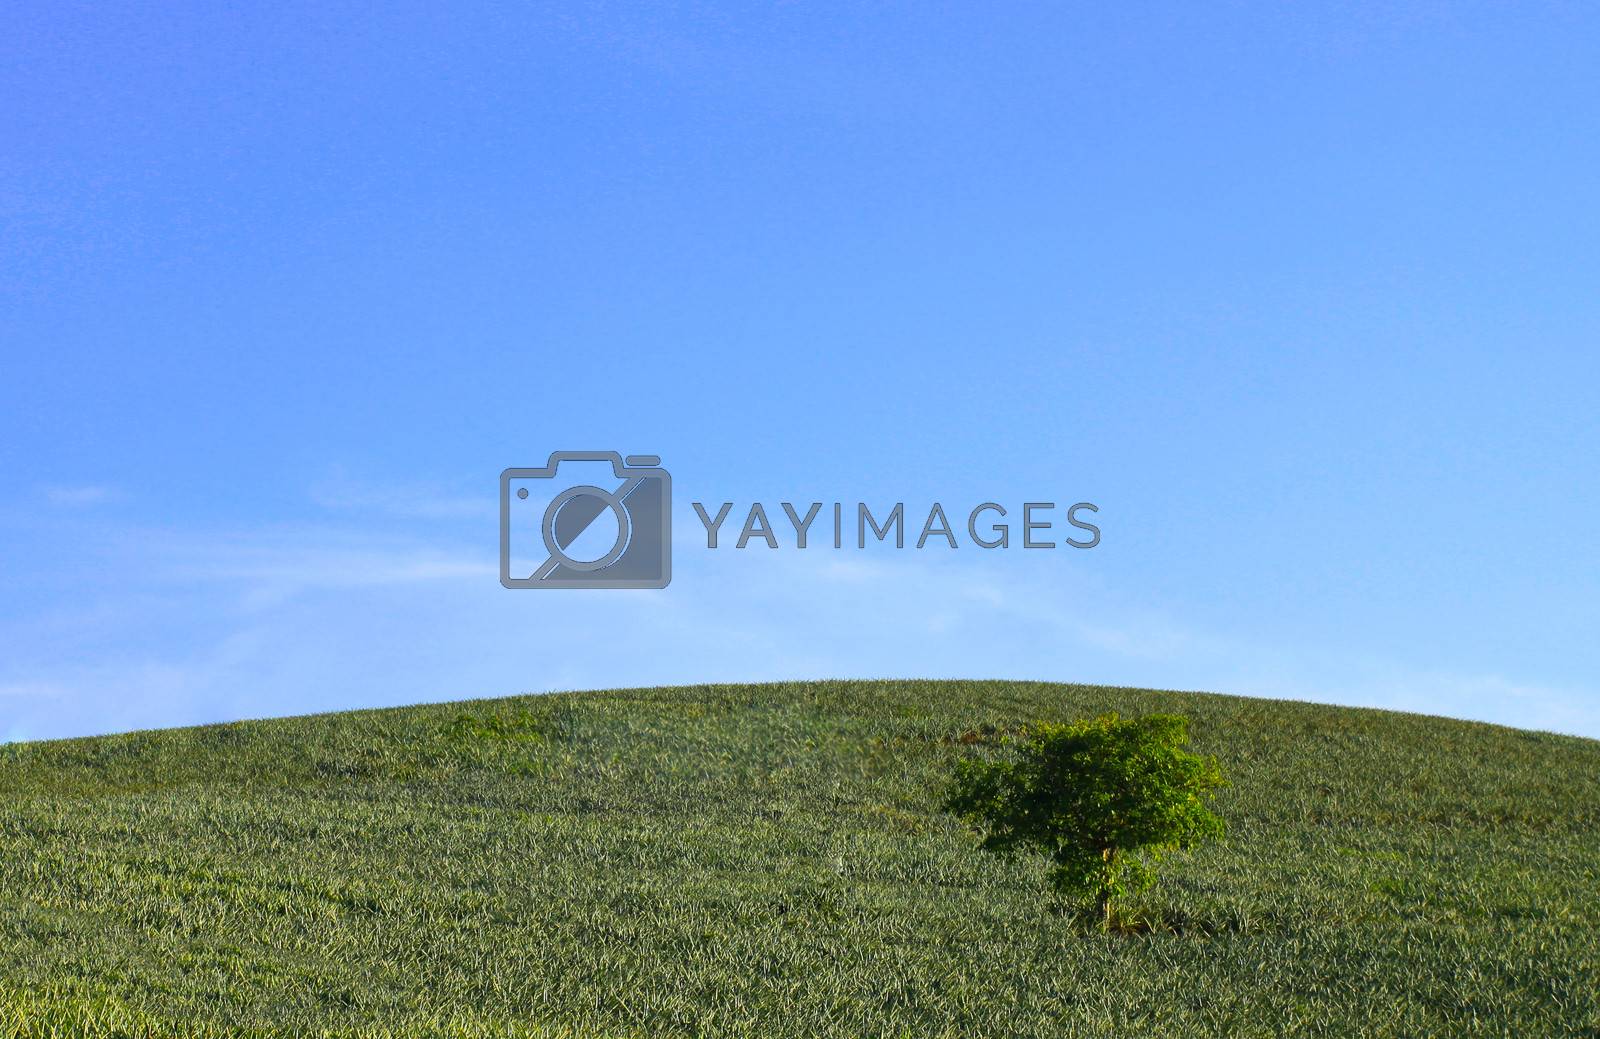 Royalty free image of green hill by zirconicusso